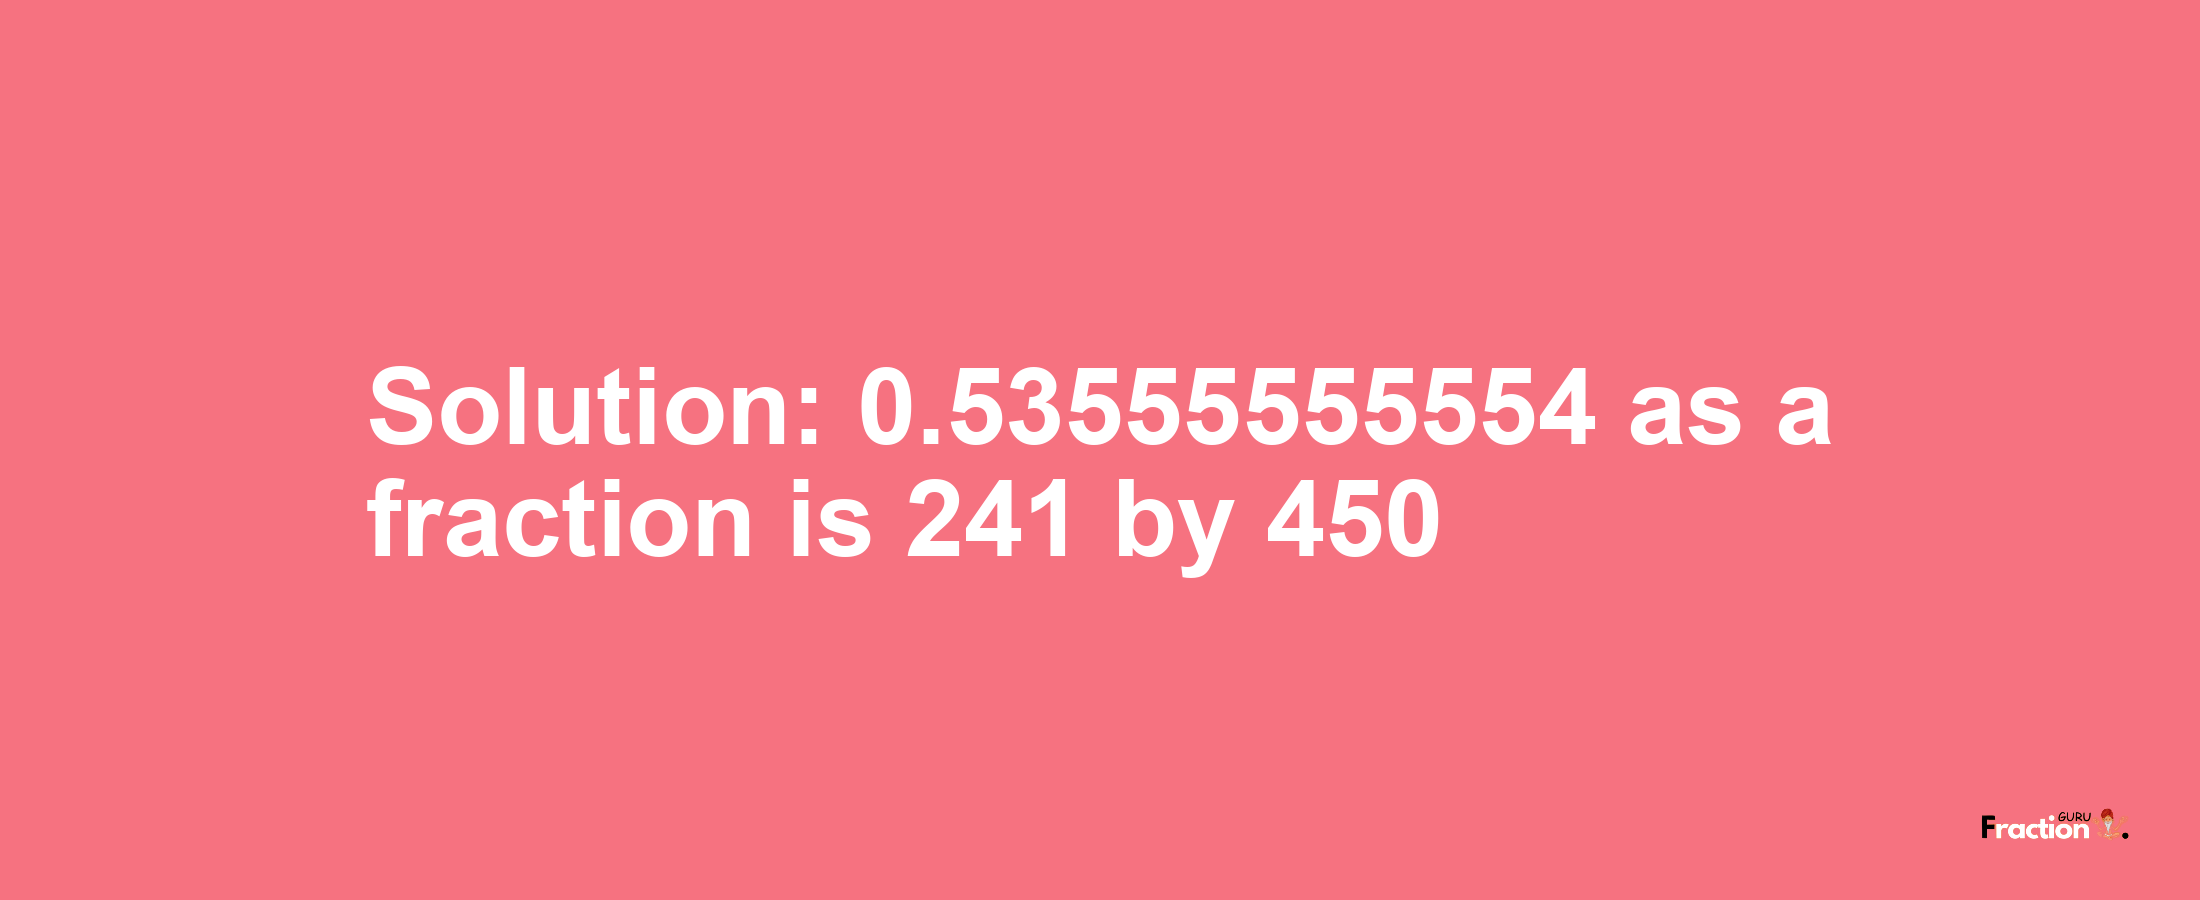 Solution:0.53555555554 as a fraction is 241/450